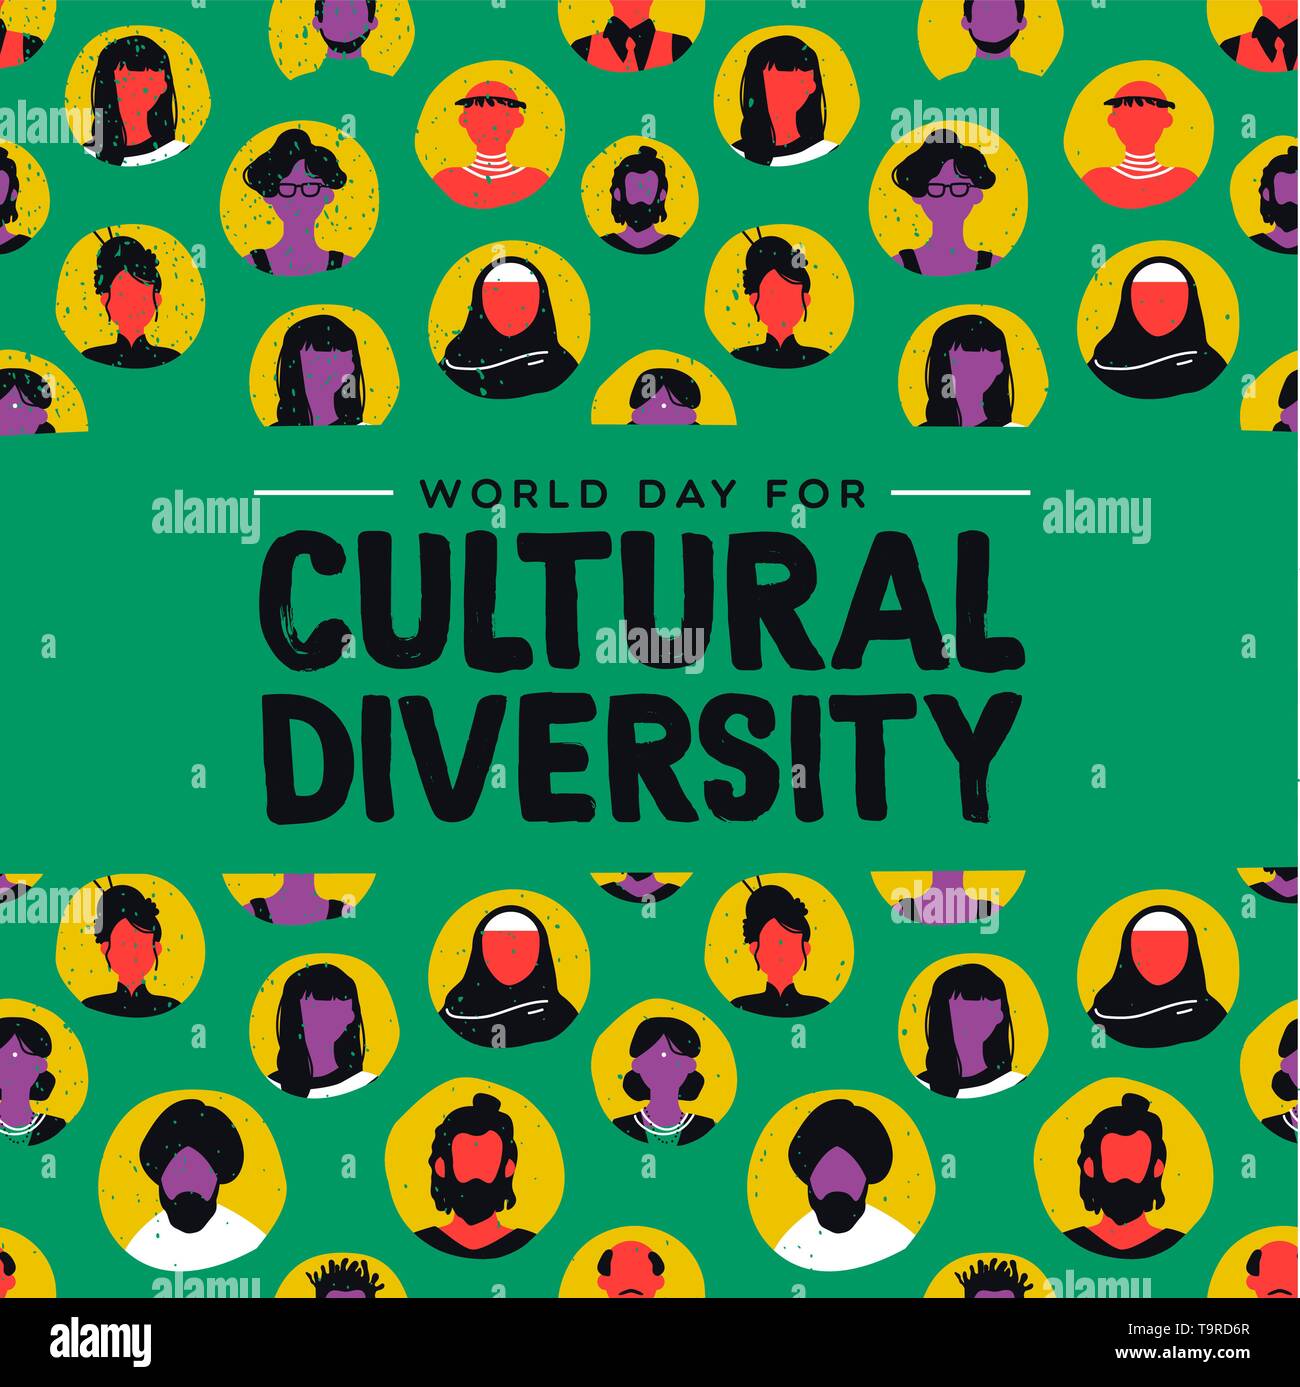 Cultural Diversity Day greeting card illustration. Diverse social group of people includes muslim, african, asian and american cultures. Stock Vector